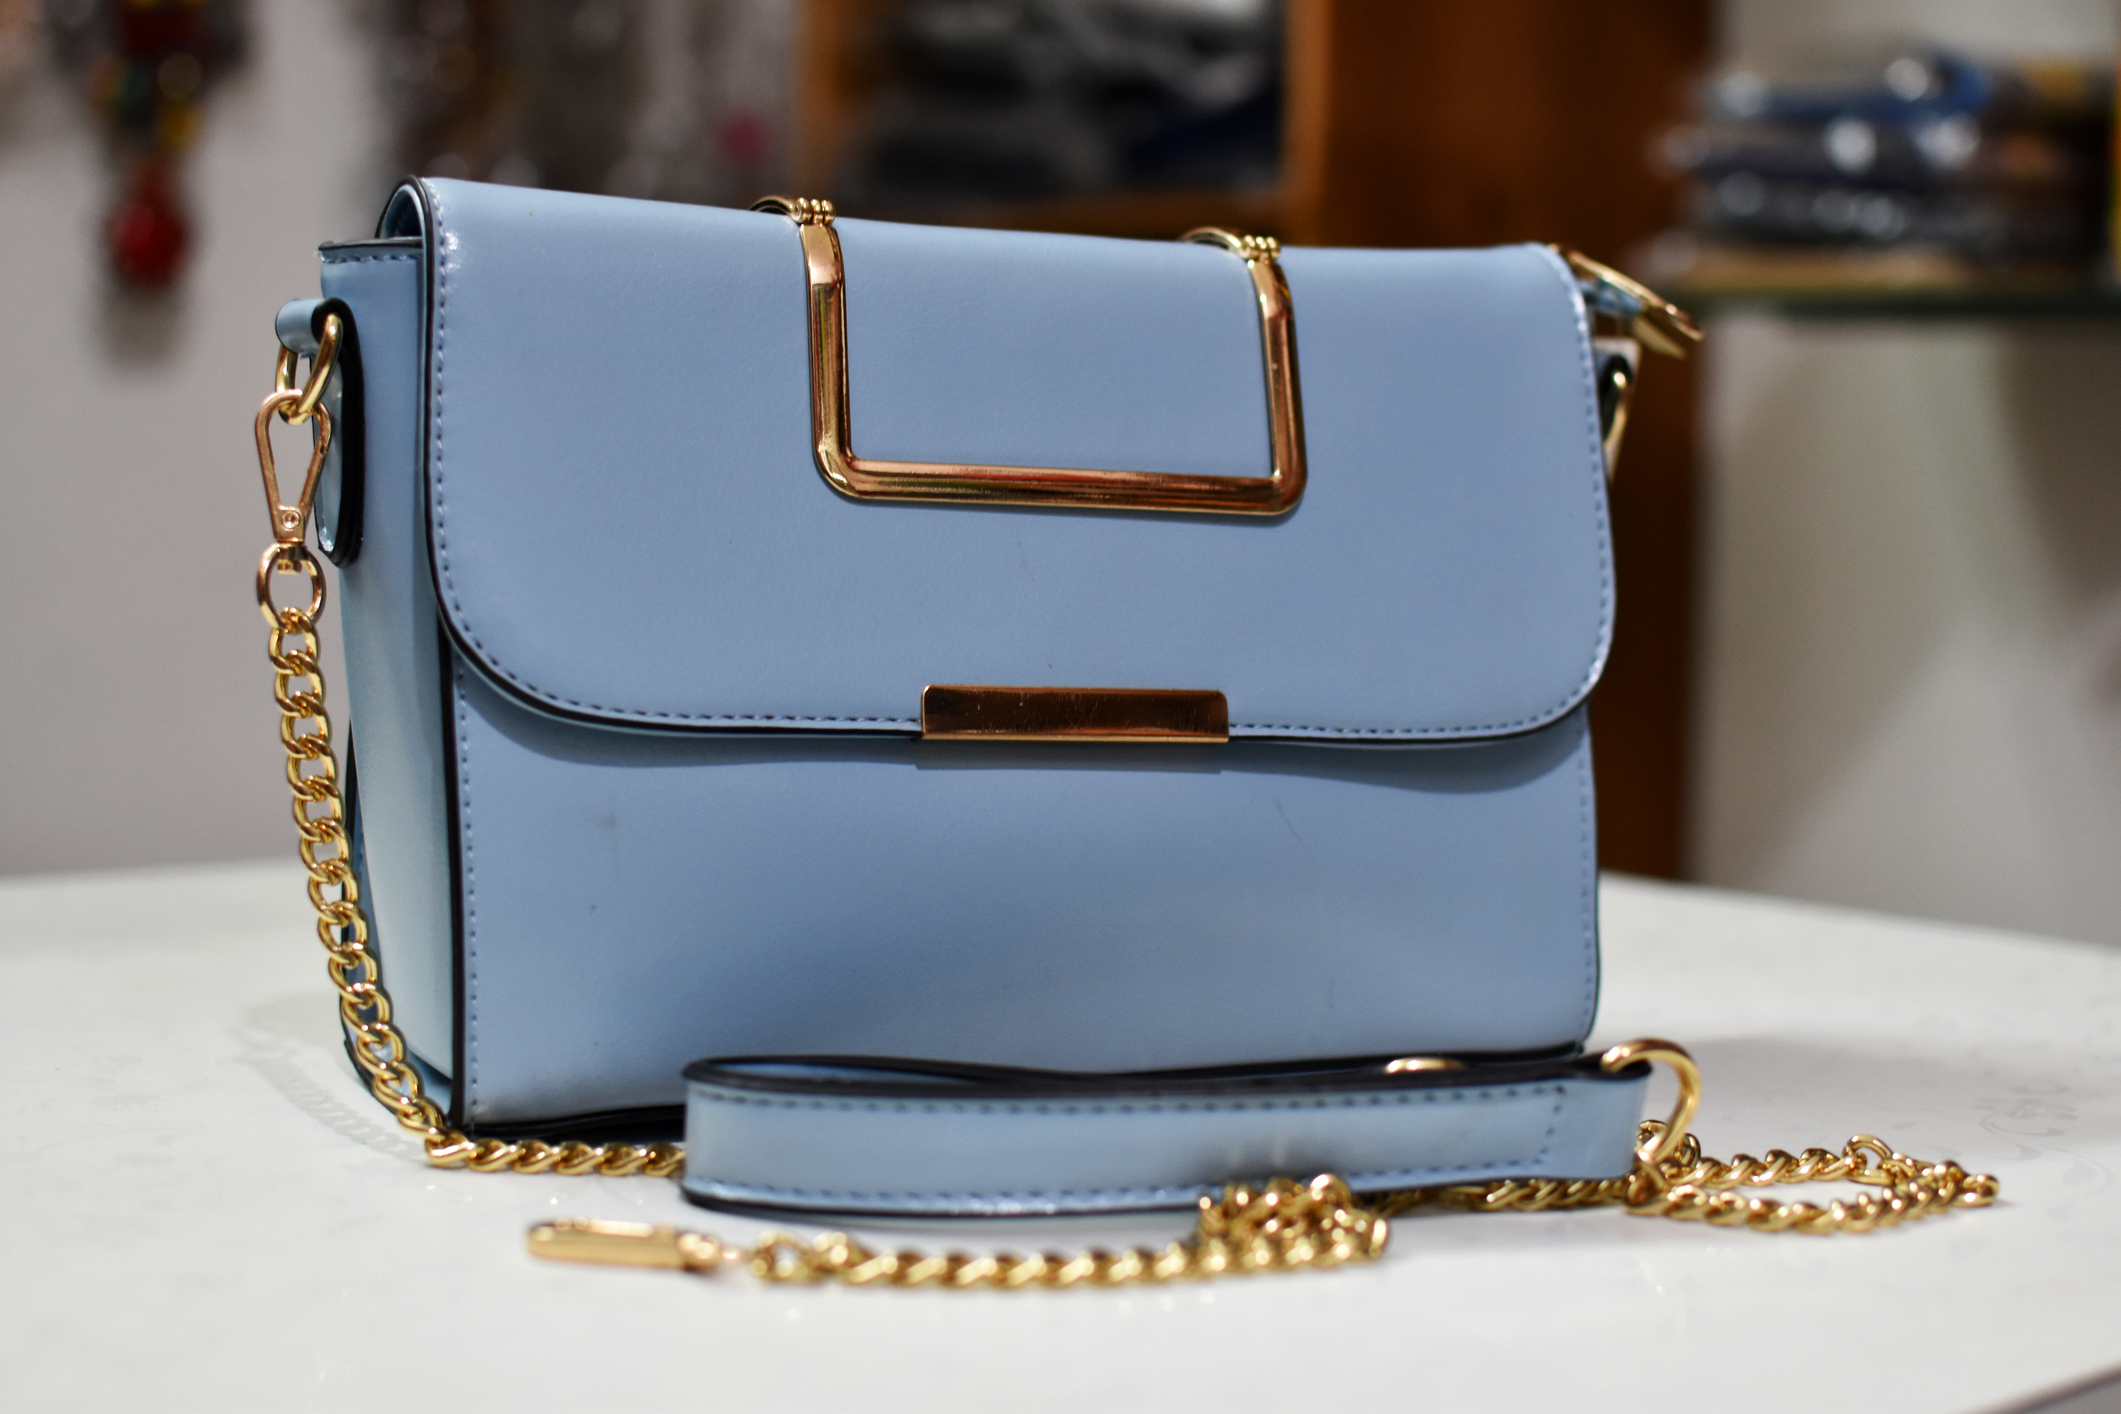 Light blue handbag with gold chain on surface